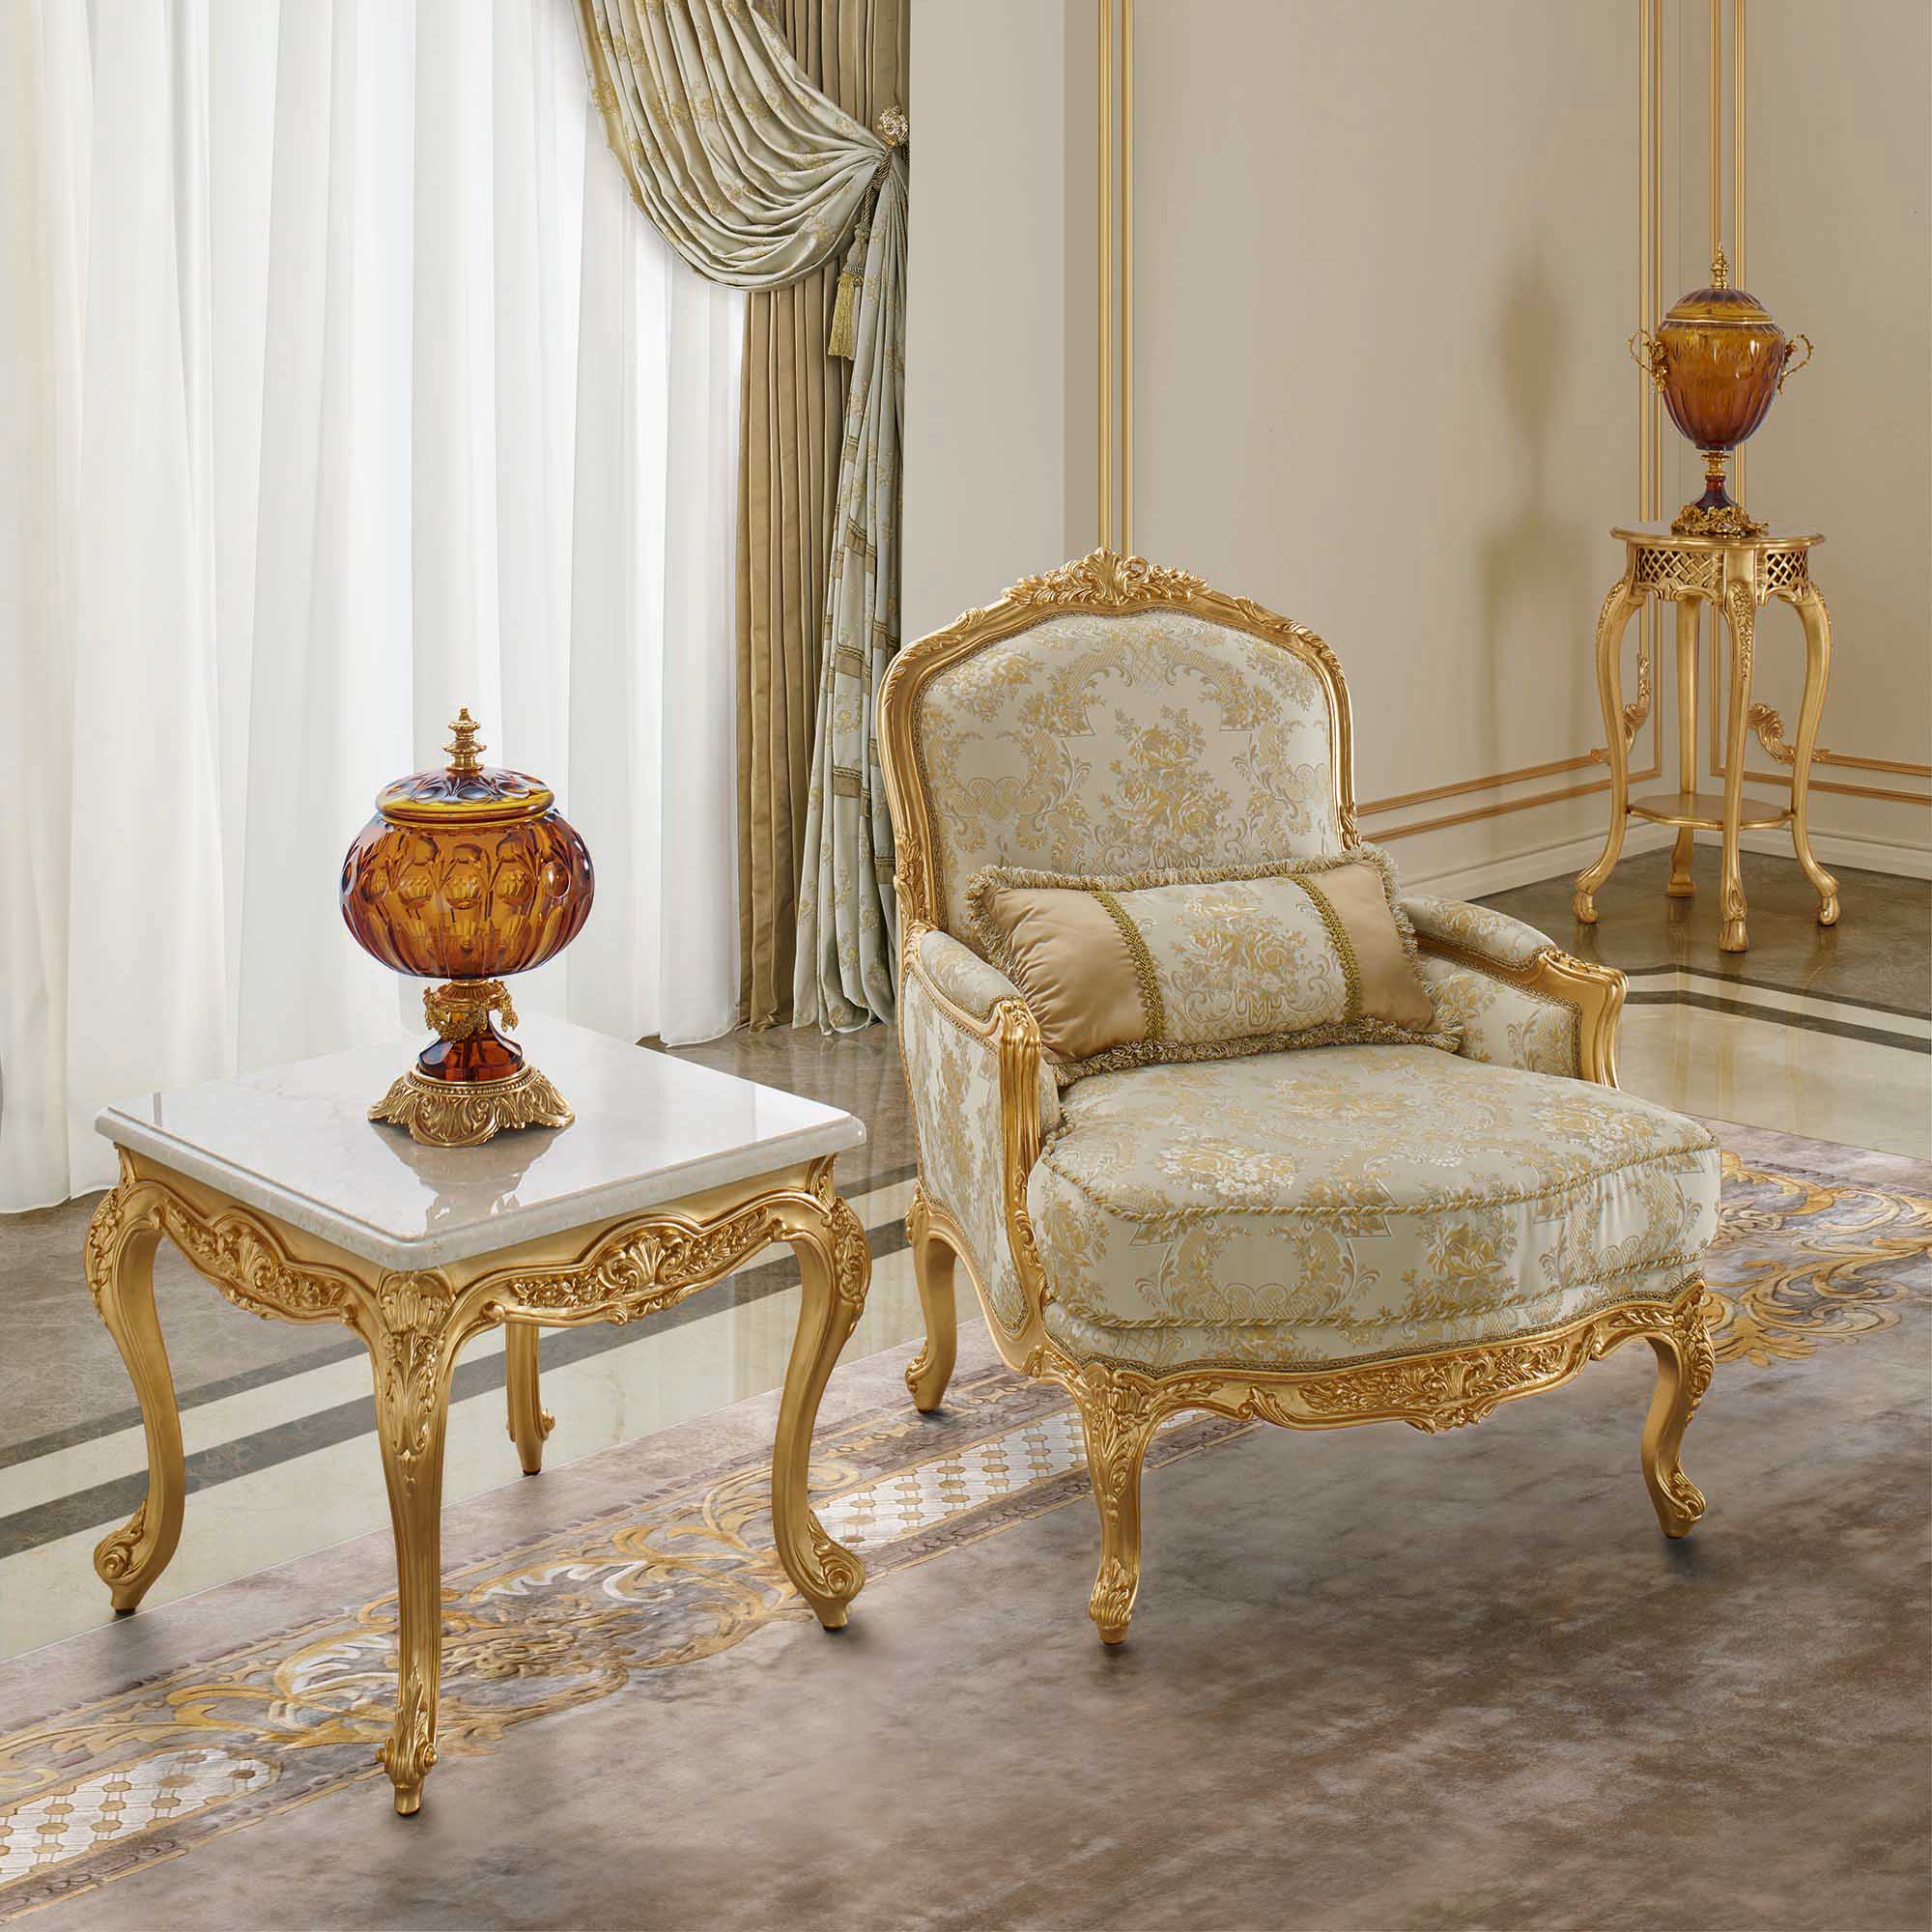 Transforming Spaces with Unique Modenese Furniture, Luxury Vases, and Classic Decor Items